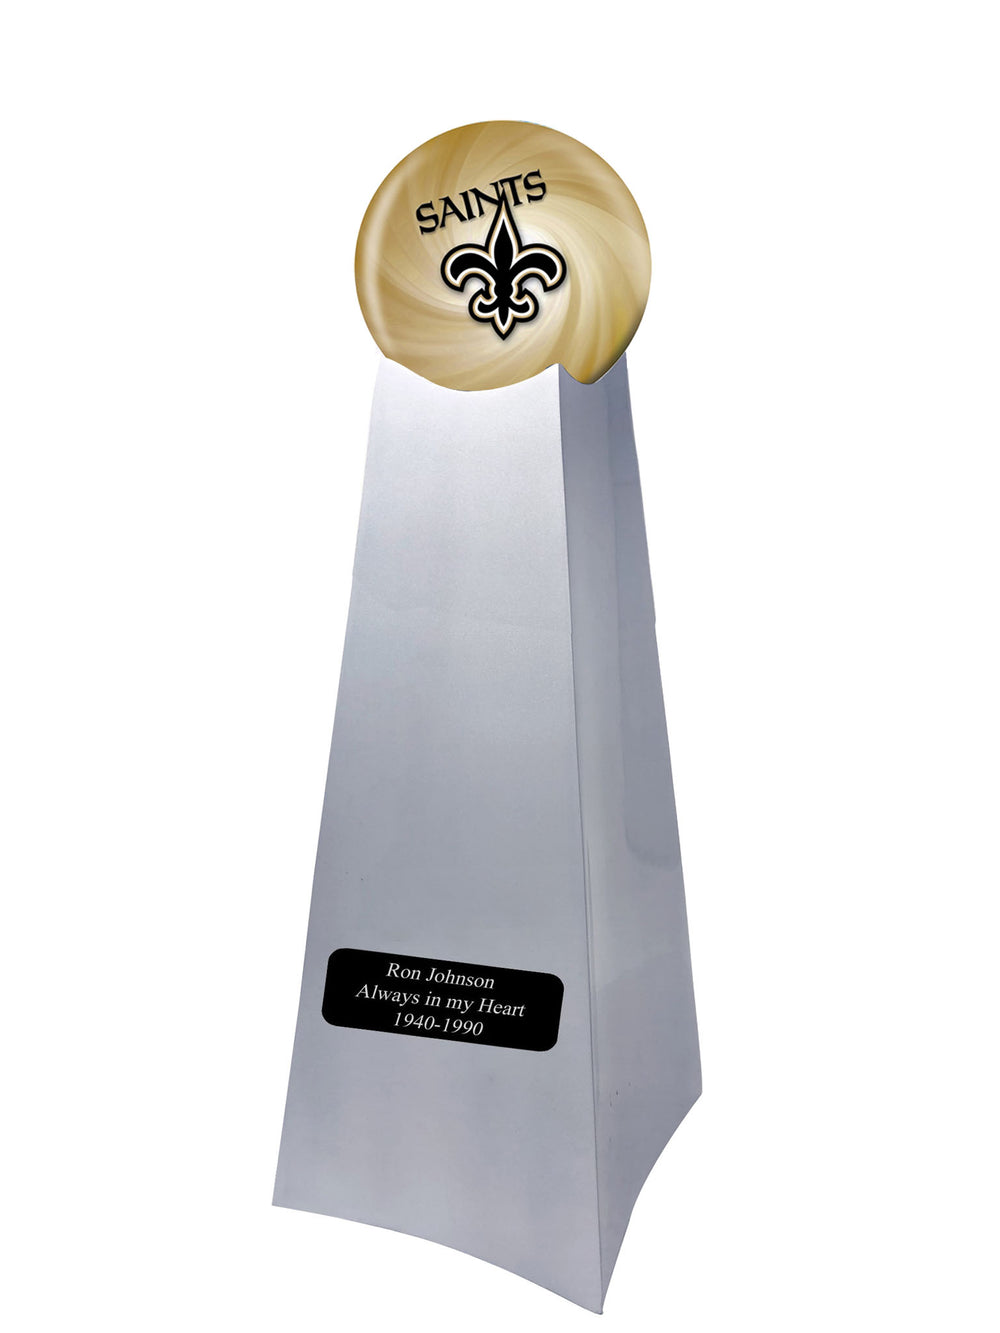 Championship Trophy Urn Base with Optional New Orleans Saints Team Sphere